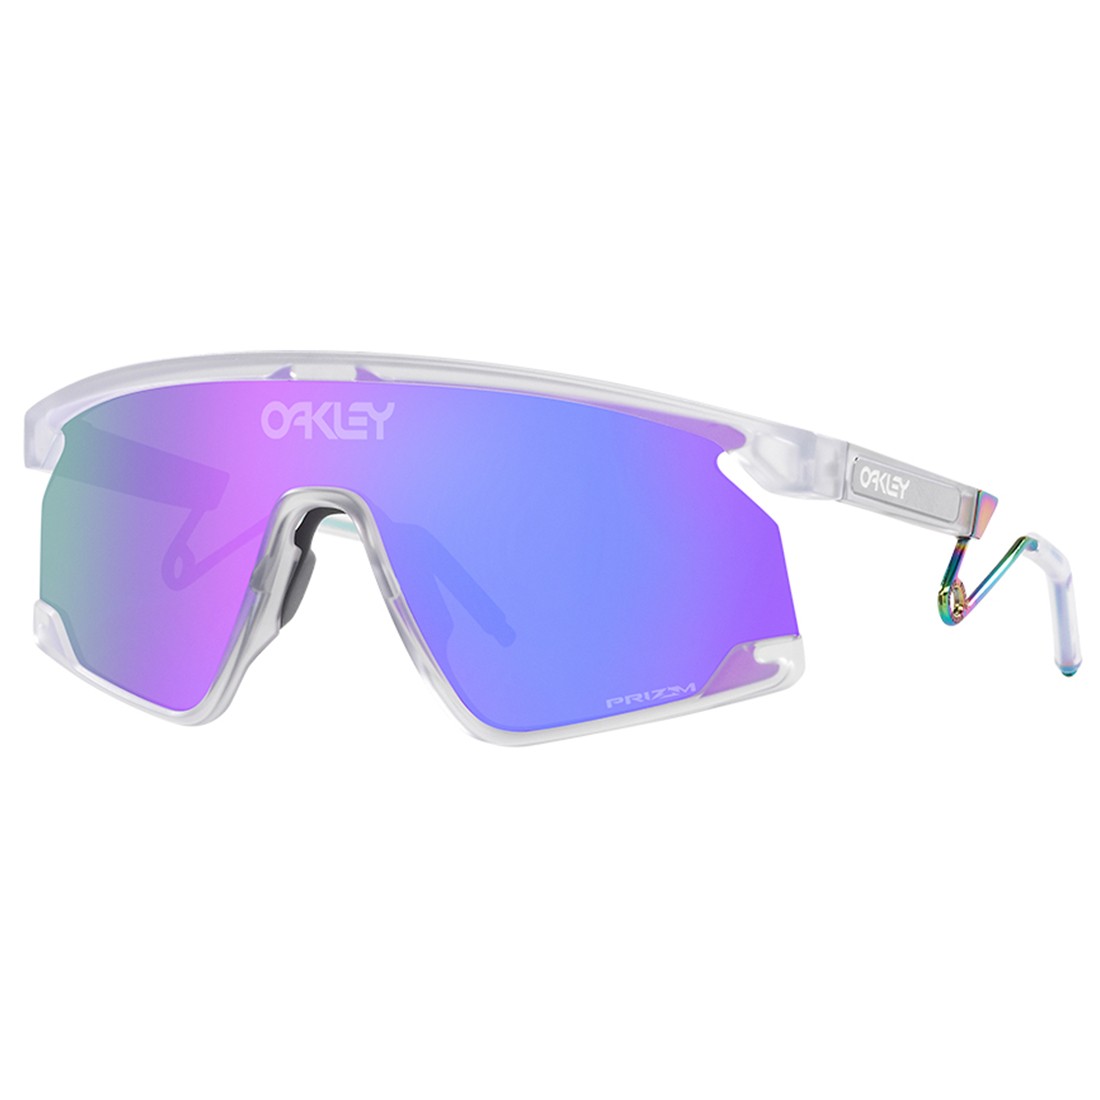 Oakley BXGTR Metai sunglasses 07YS (clear / prizm violet)